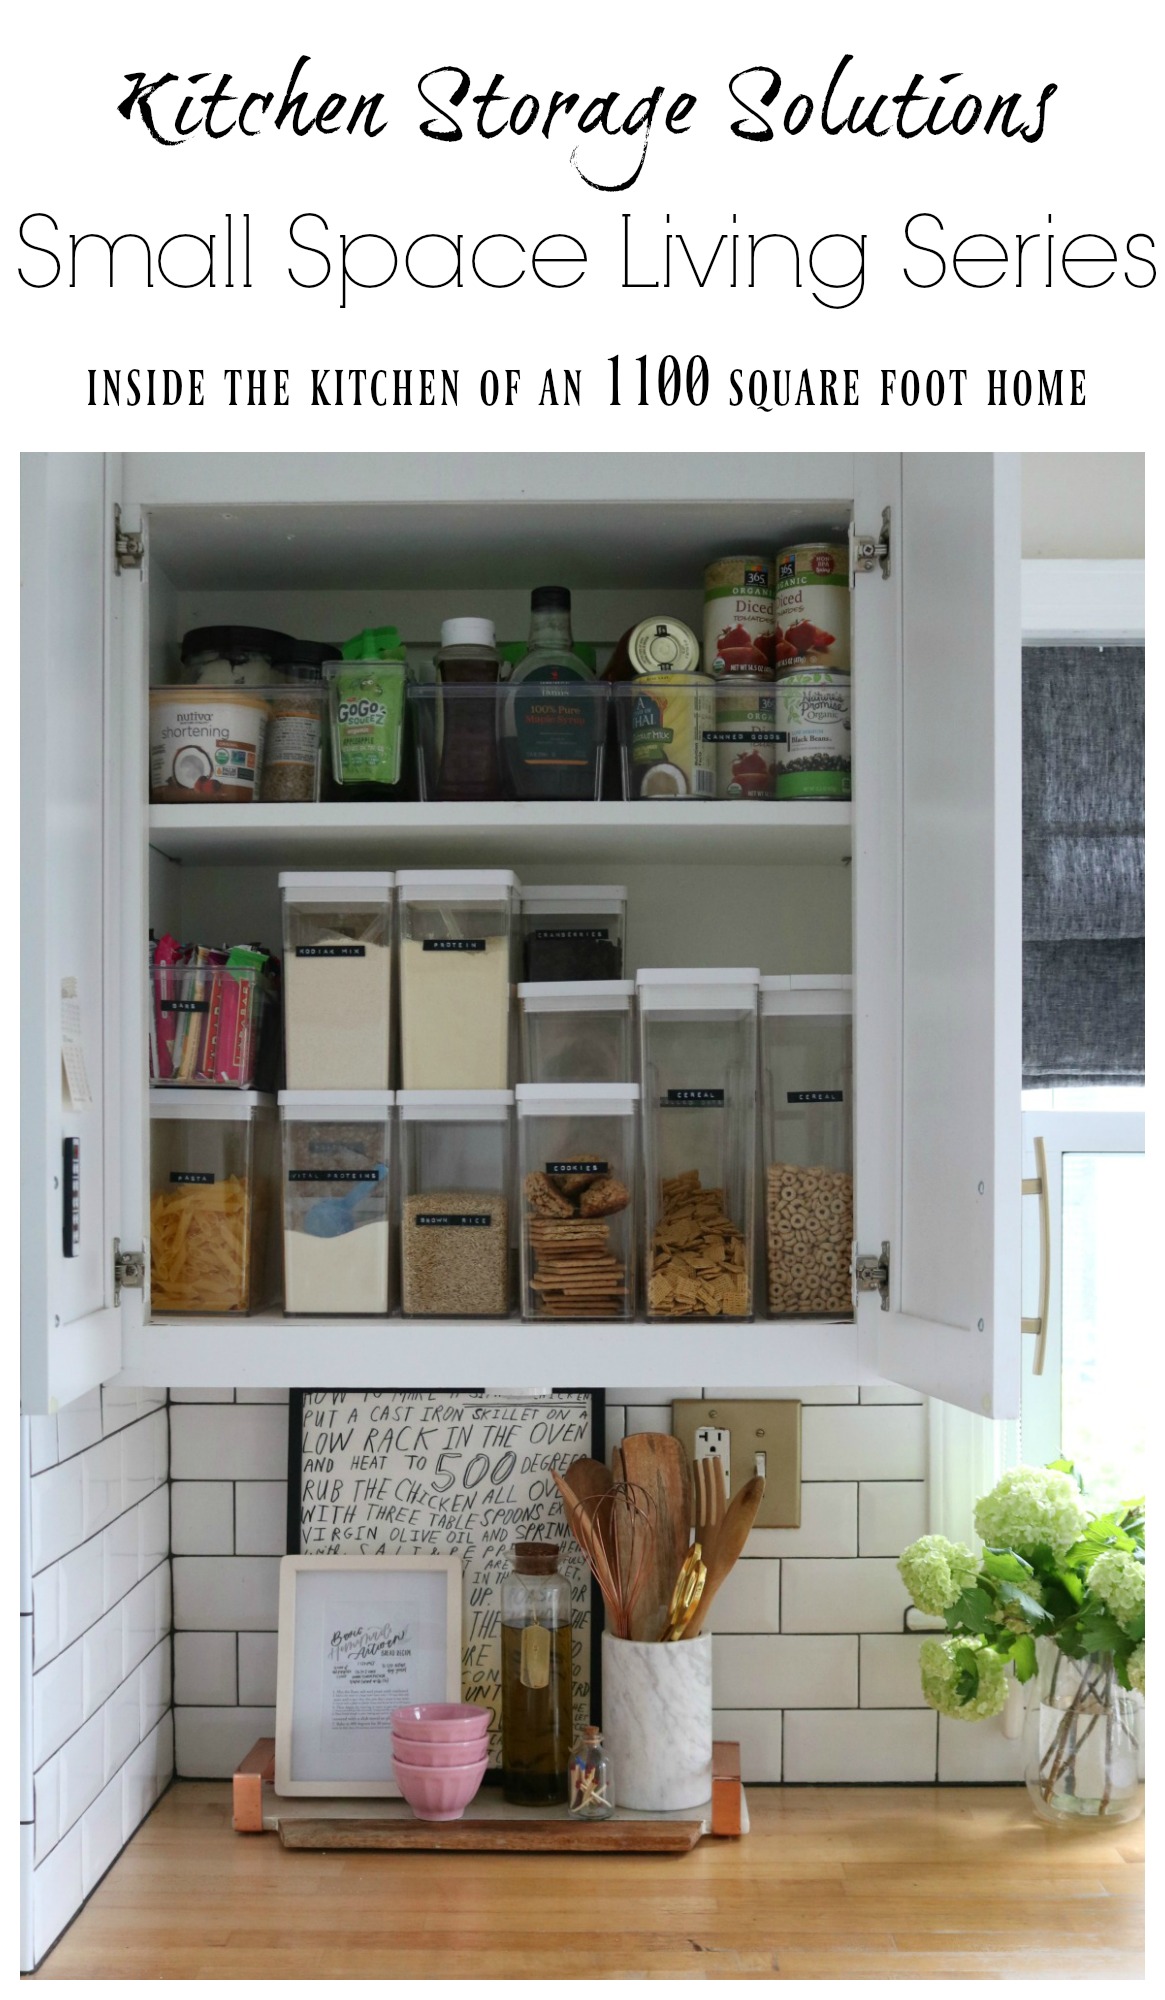 https://nestingwithgrace.com/wp-content/uploads/2018/05/Kitchen-Organizing-Tips-Small-Space-Living-001.jpg